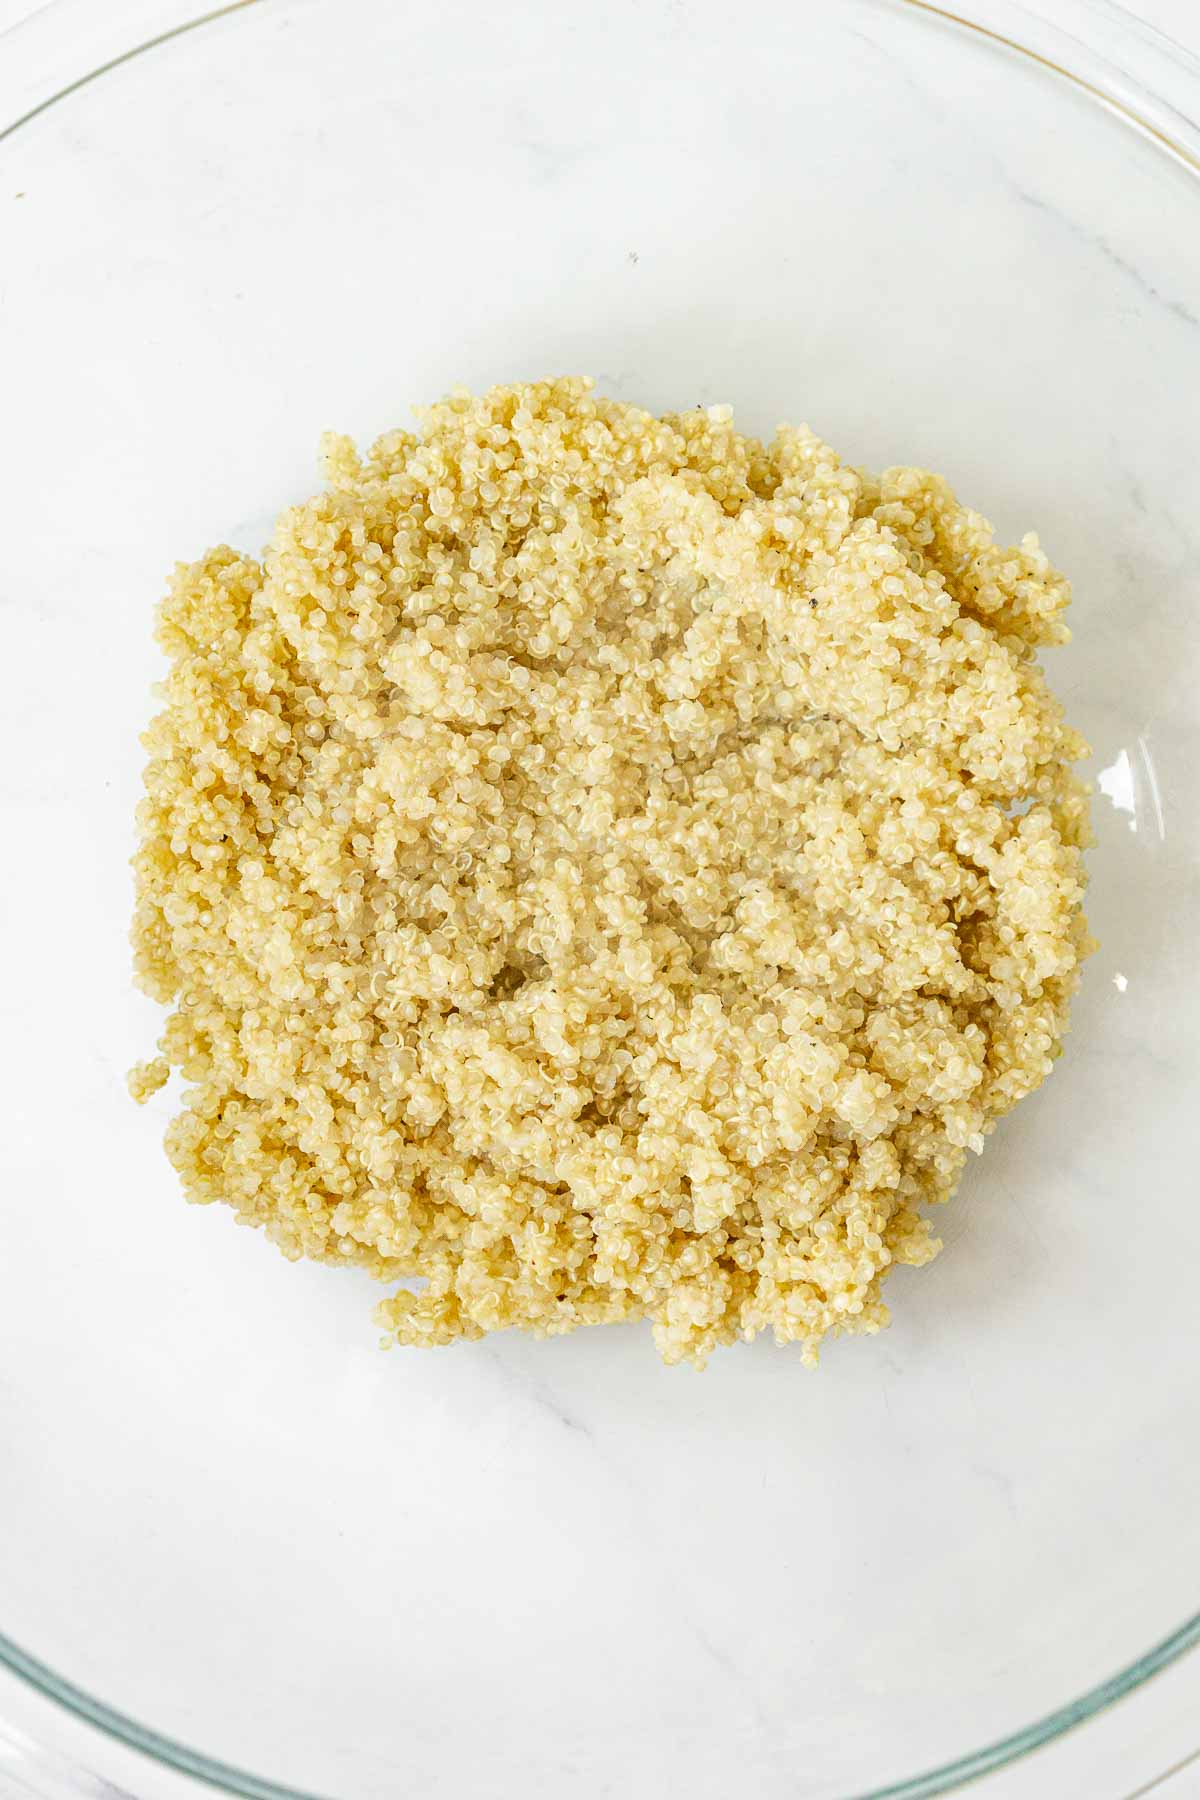 Cooked quinoa in a bowl.